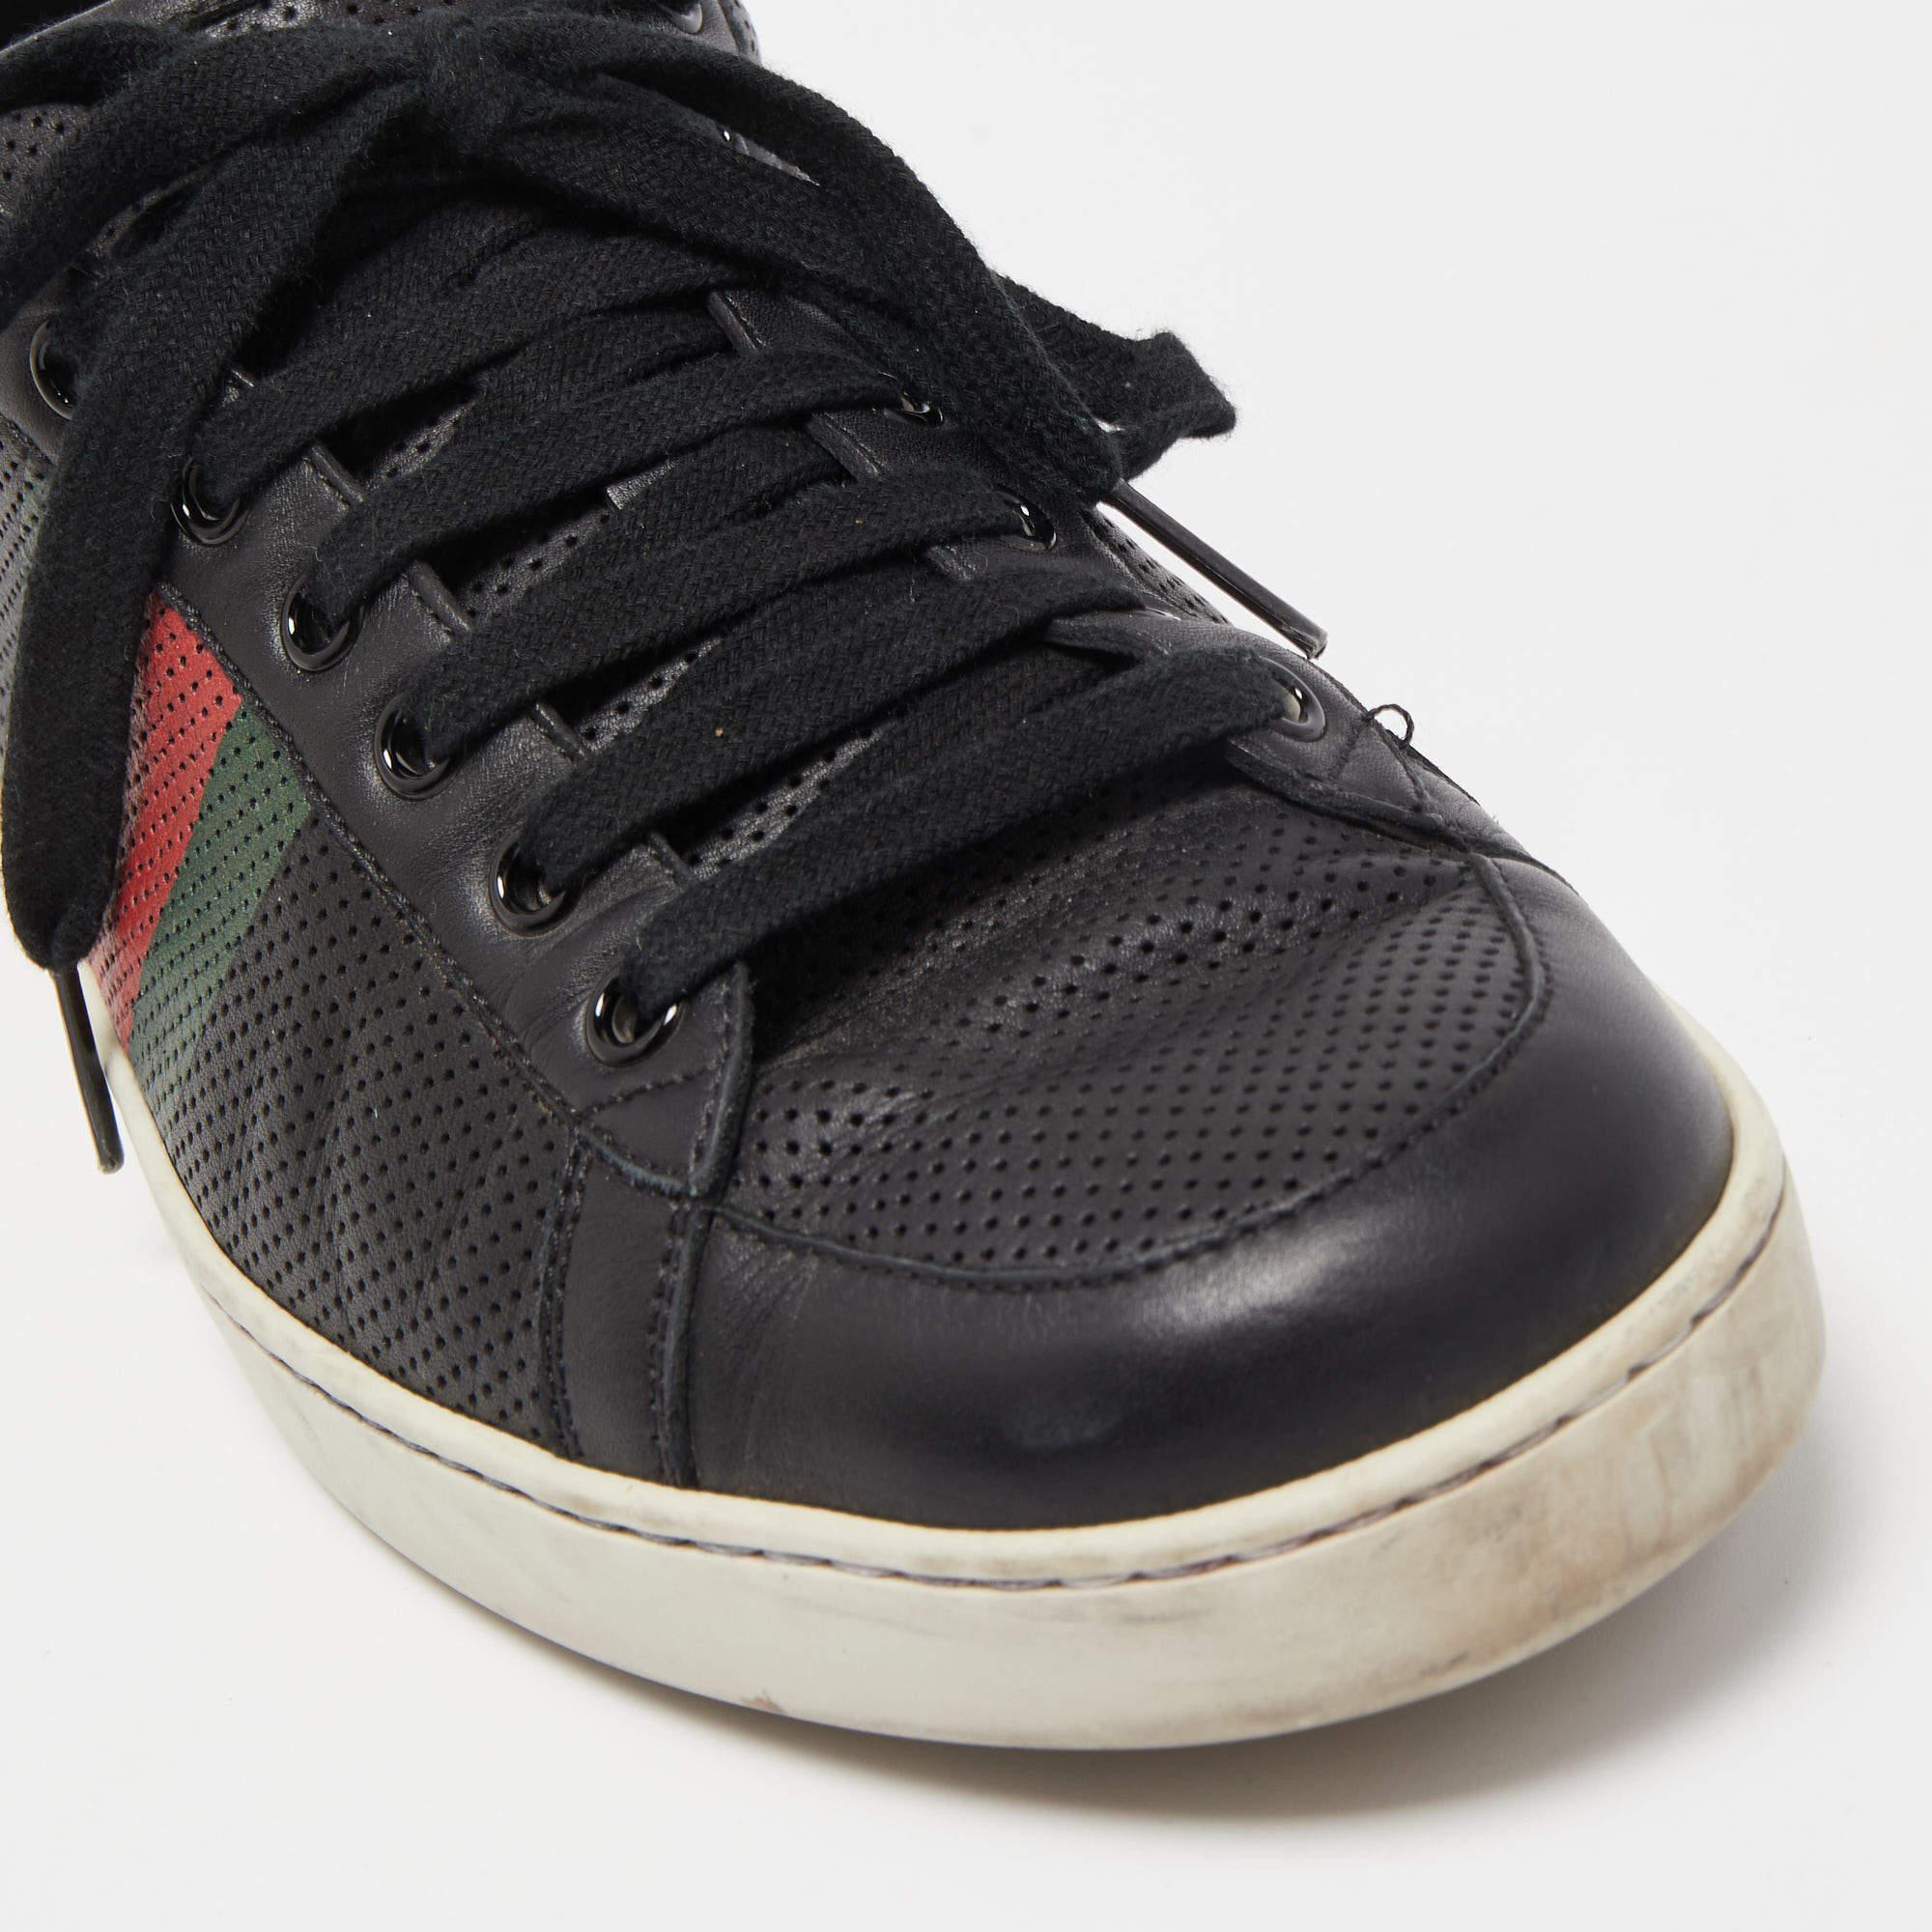 Gucci Black Perforated Leather Web Detail Low Top Sneakers Size 42.5 In Good Condition For Sale In Dubai, Al Qouz 2